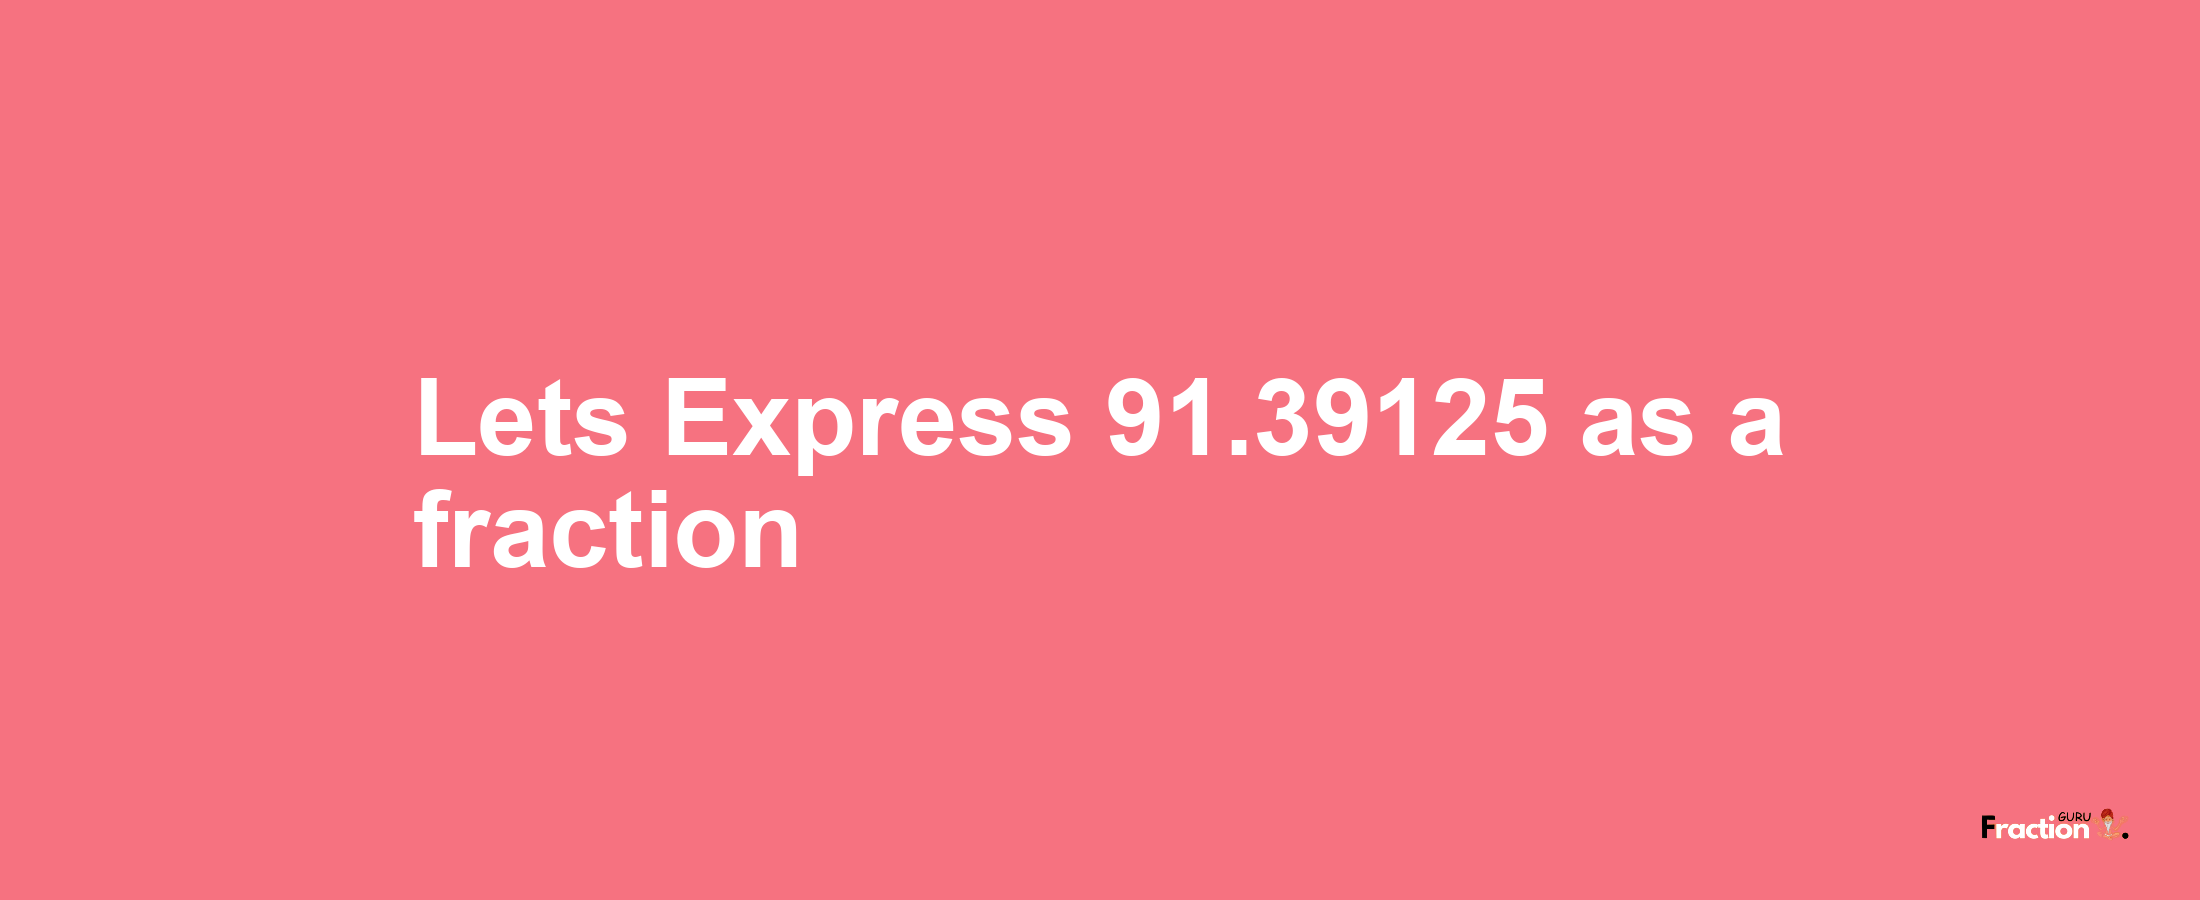 Lets Express 91.39125 as afraction